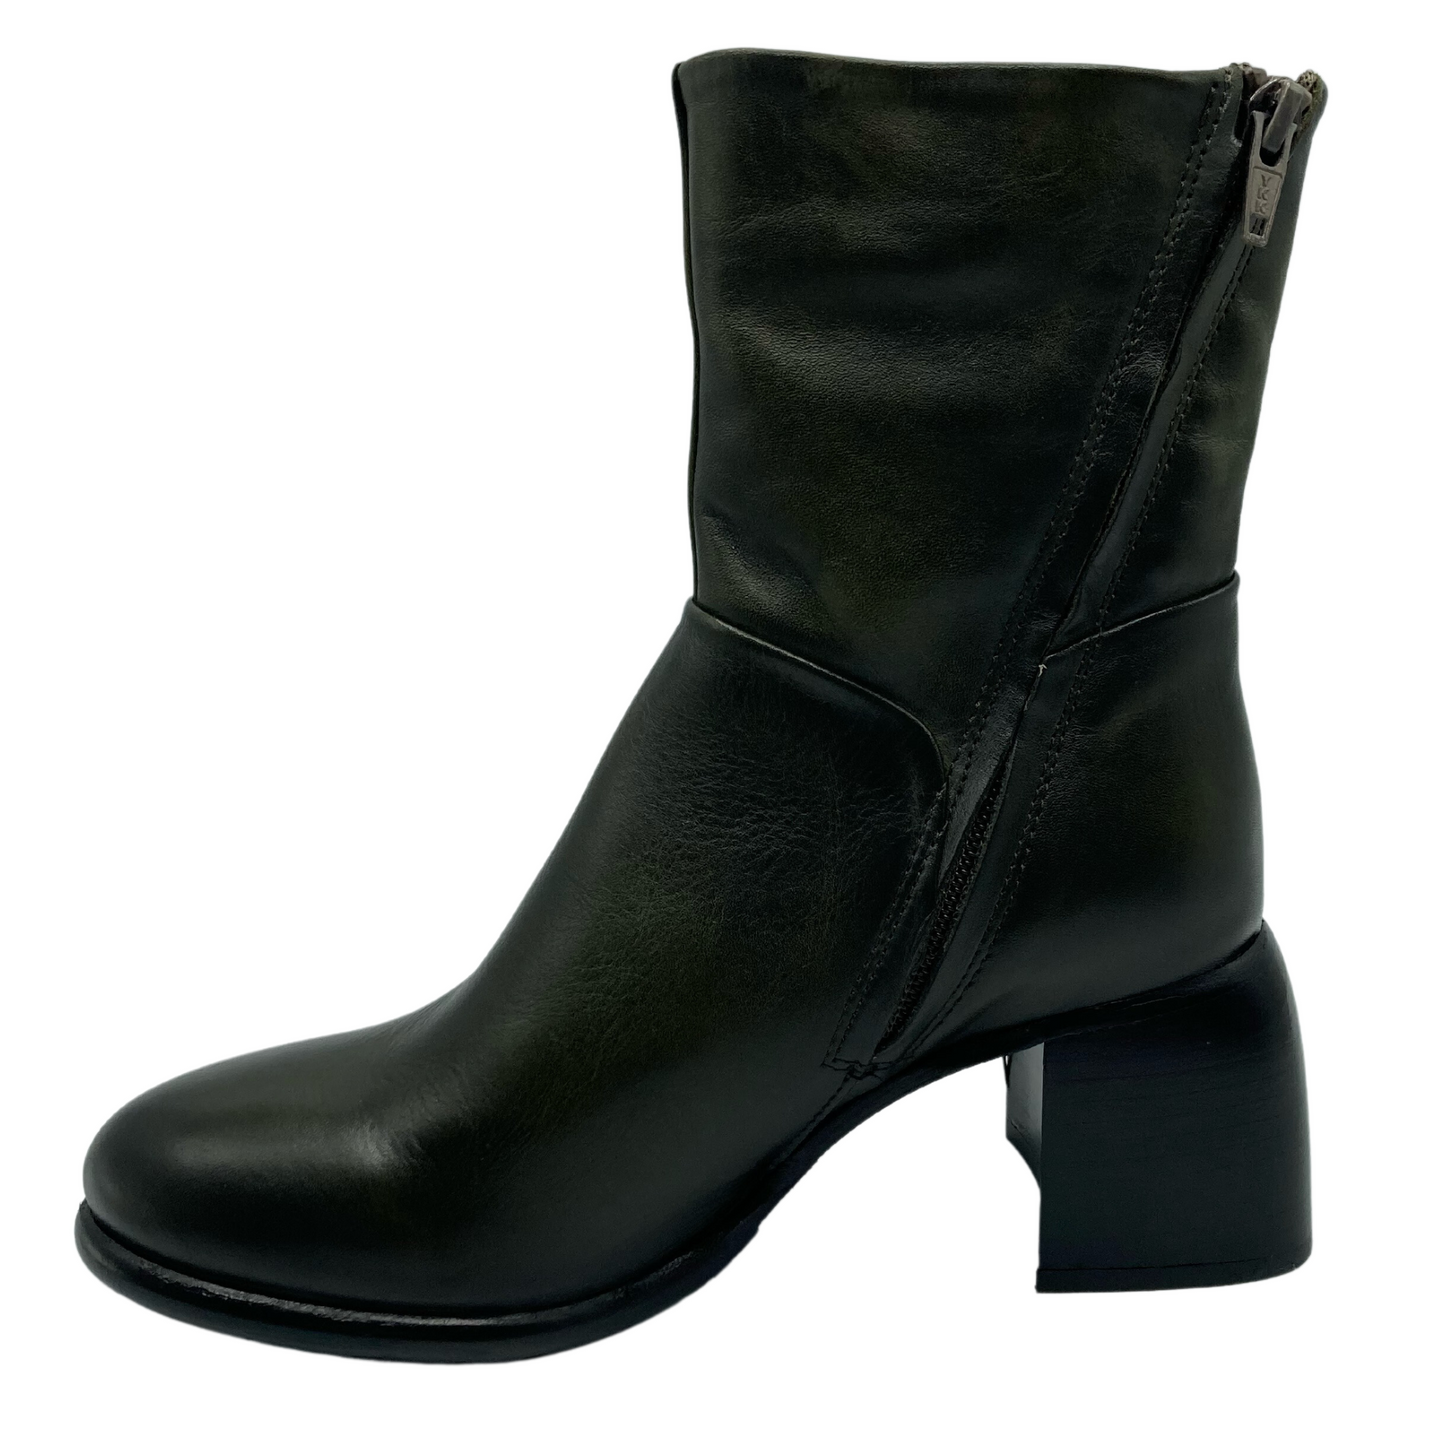 Left facing view of green leather short boot with zipper closure and block heel